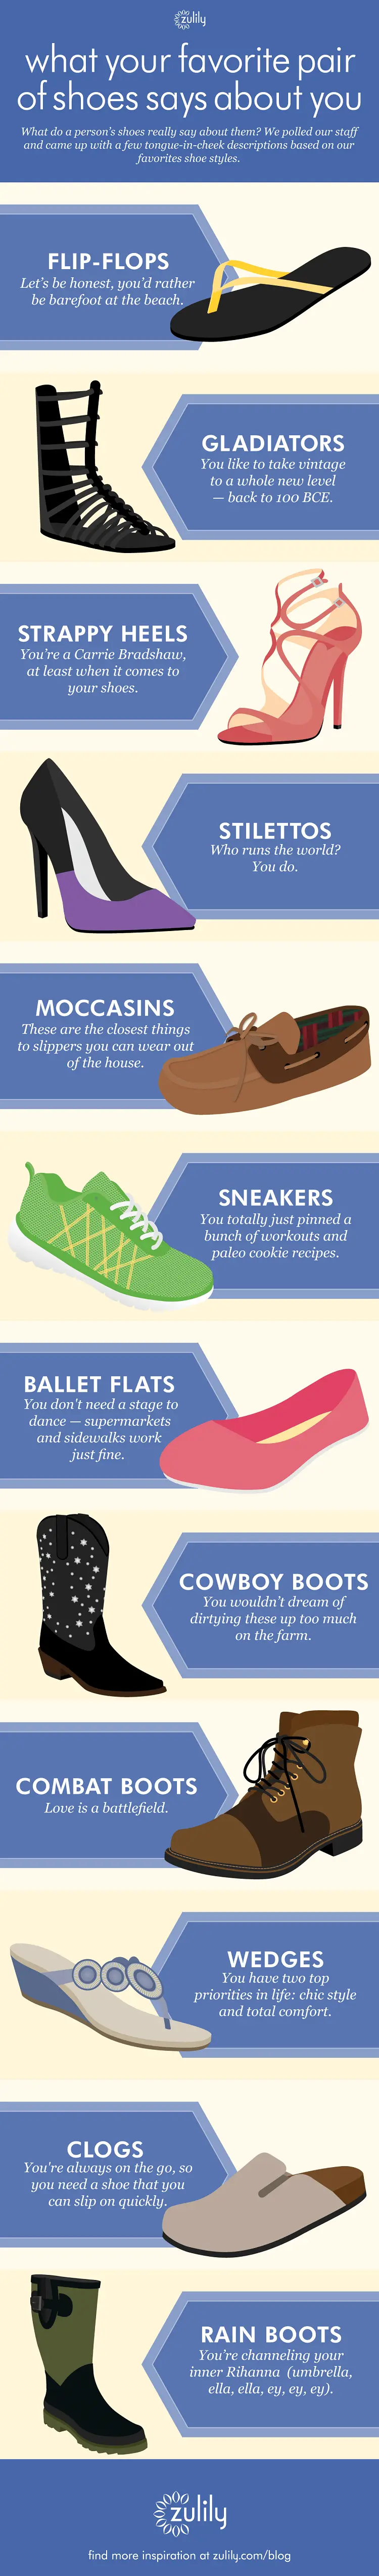 what-your-favorite-pair-of-shoes-really-say-about-you